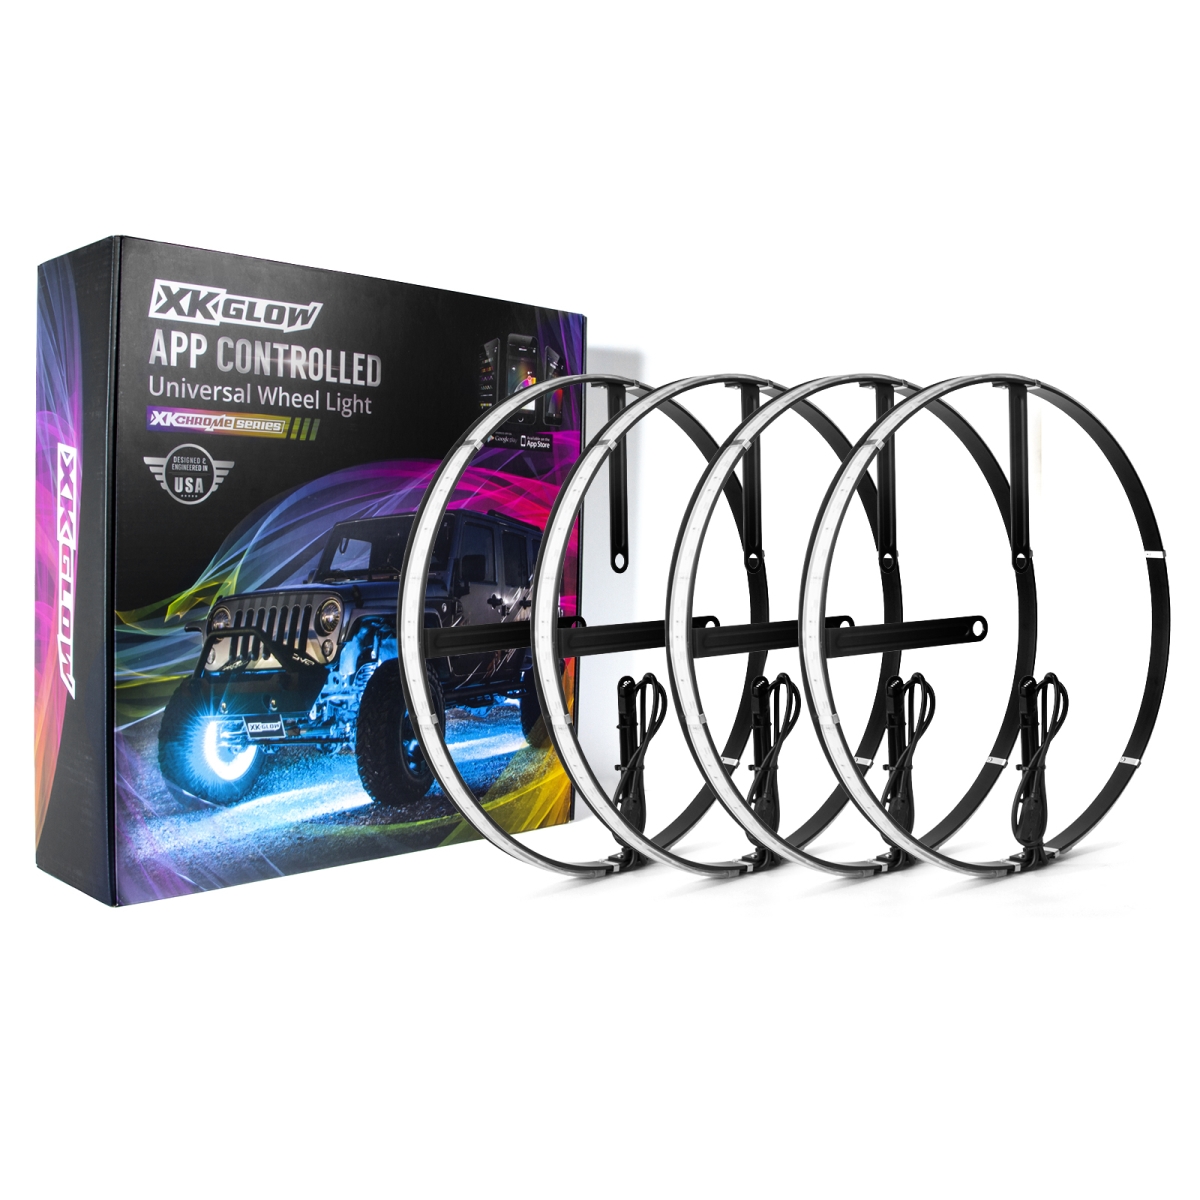 Xkgxk-wheel-kit 15 In. Wheel Ring Light Kit Xk Chrome App Controlled With Turn Signal Function - 4 Piece